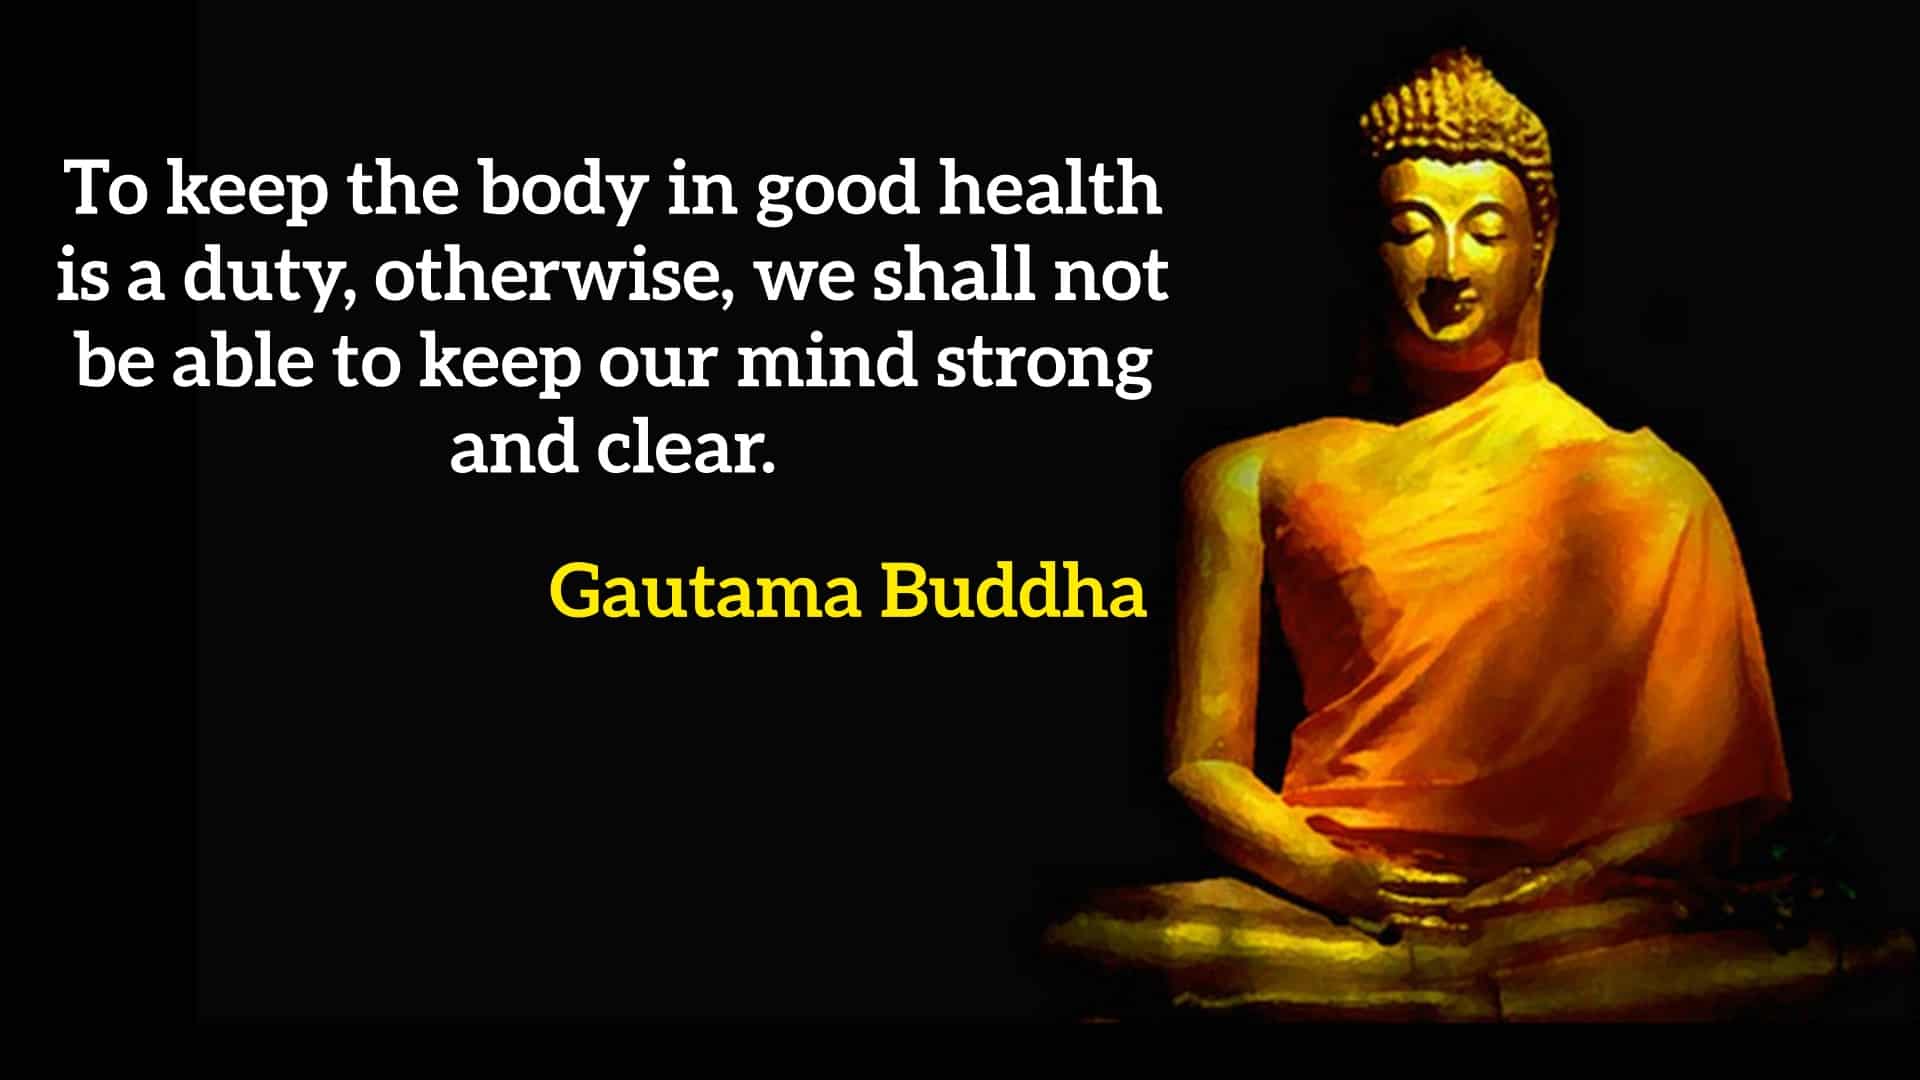 To keep the body in good health is a duty, otherwise, we shall not be able to keep our mind strong and clear.